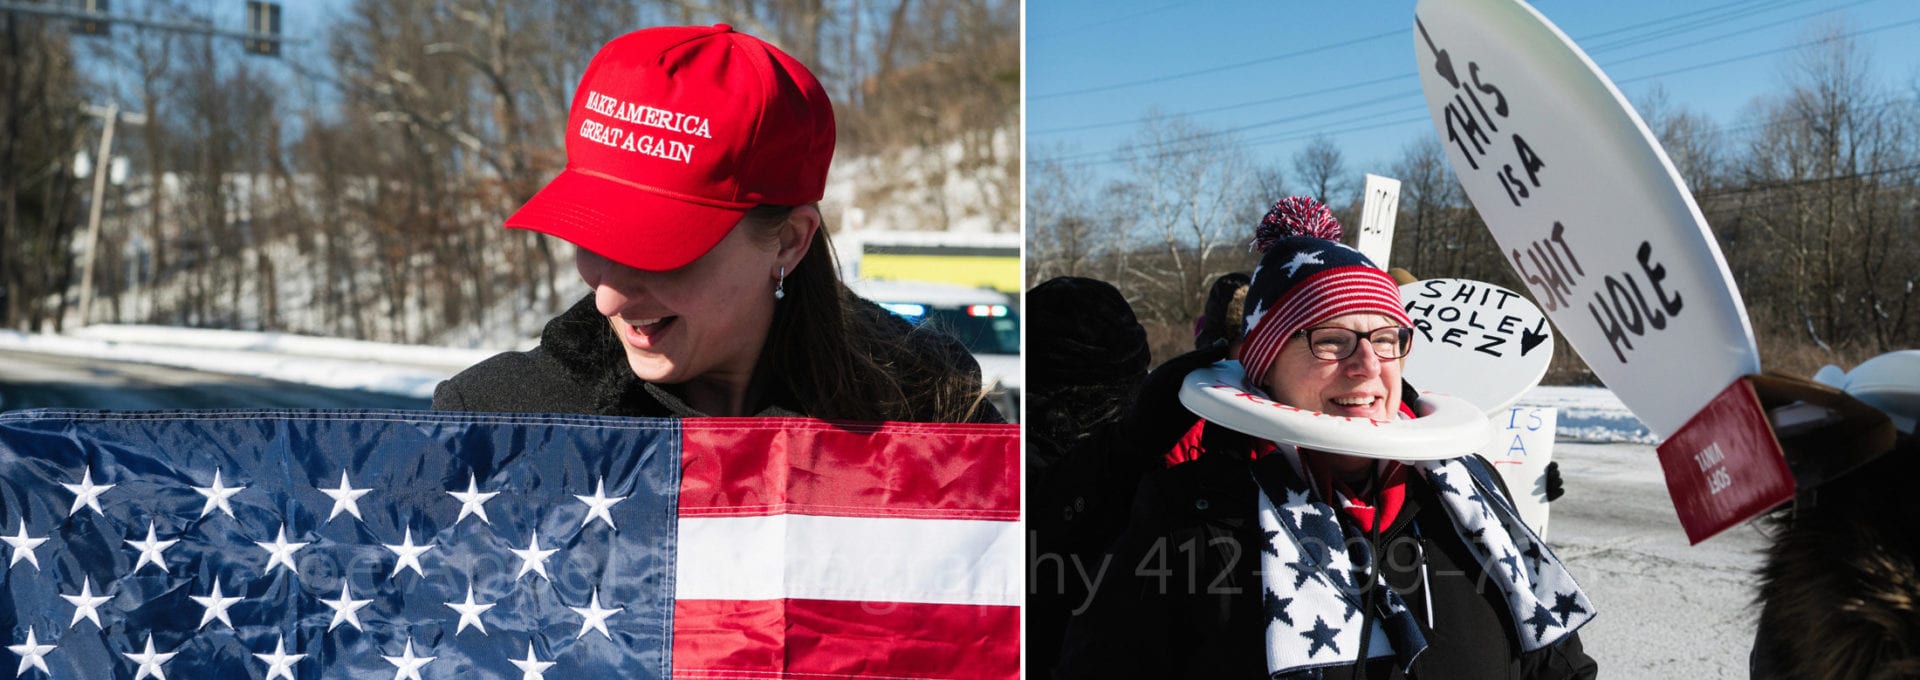 Two photographs by an Editorial Photographer in Pittsburgh: A woman wearing a Make America Great Again hat looks down and smiles at an American flag that she's holding. In the second photo a woman with a red, white, and blue toque wears a toilet seat around her head referencing a derogatory statement attributed to the president of the united states.